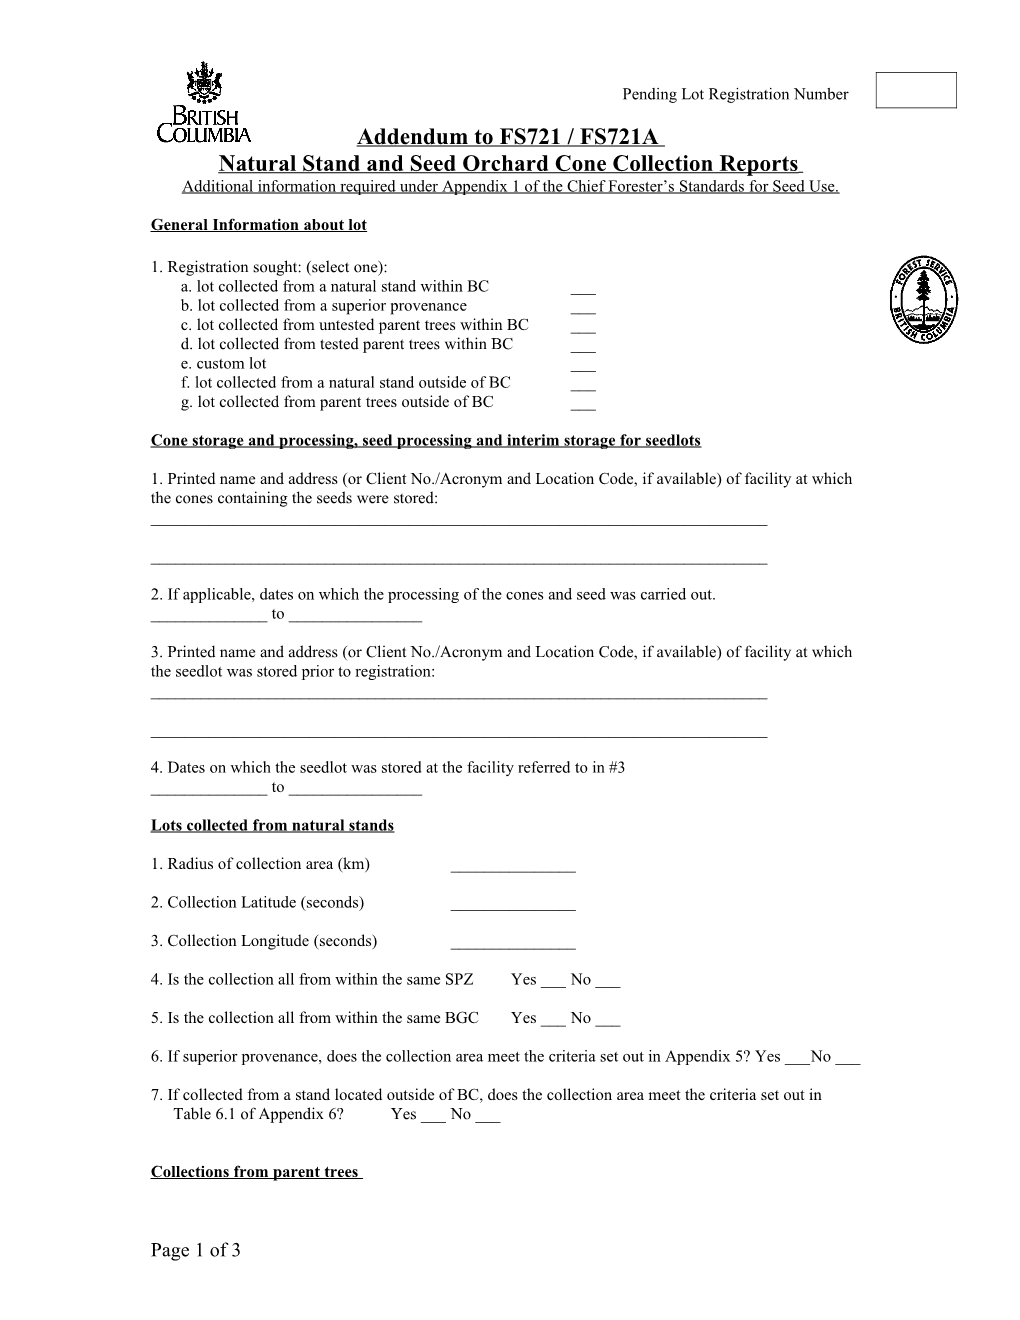 Addendum to FS721 / FS721A Natural and Orchard Collection Reports for Online Entry And